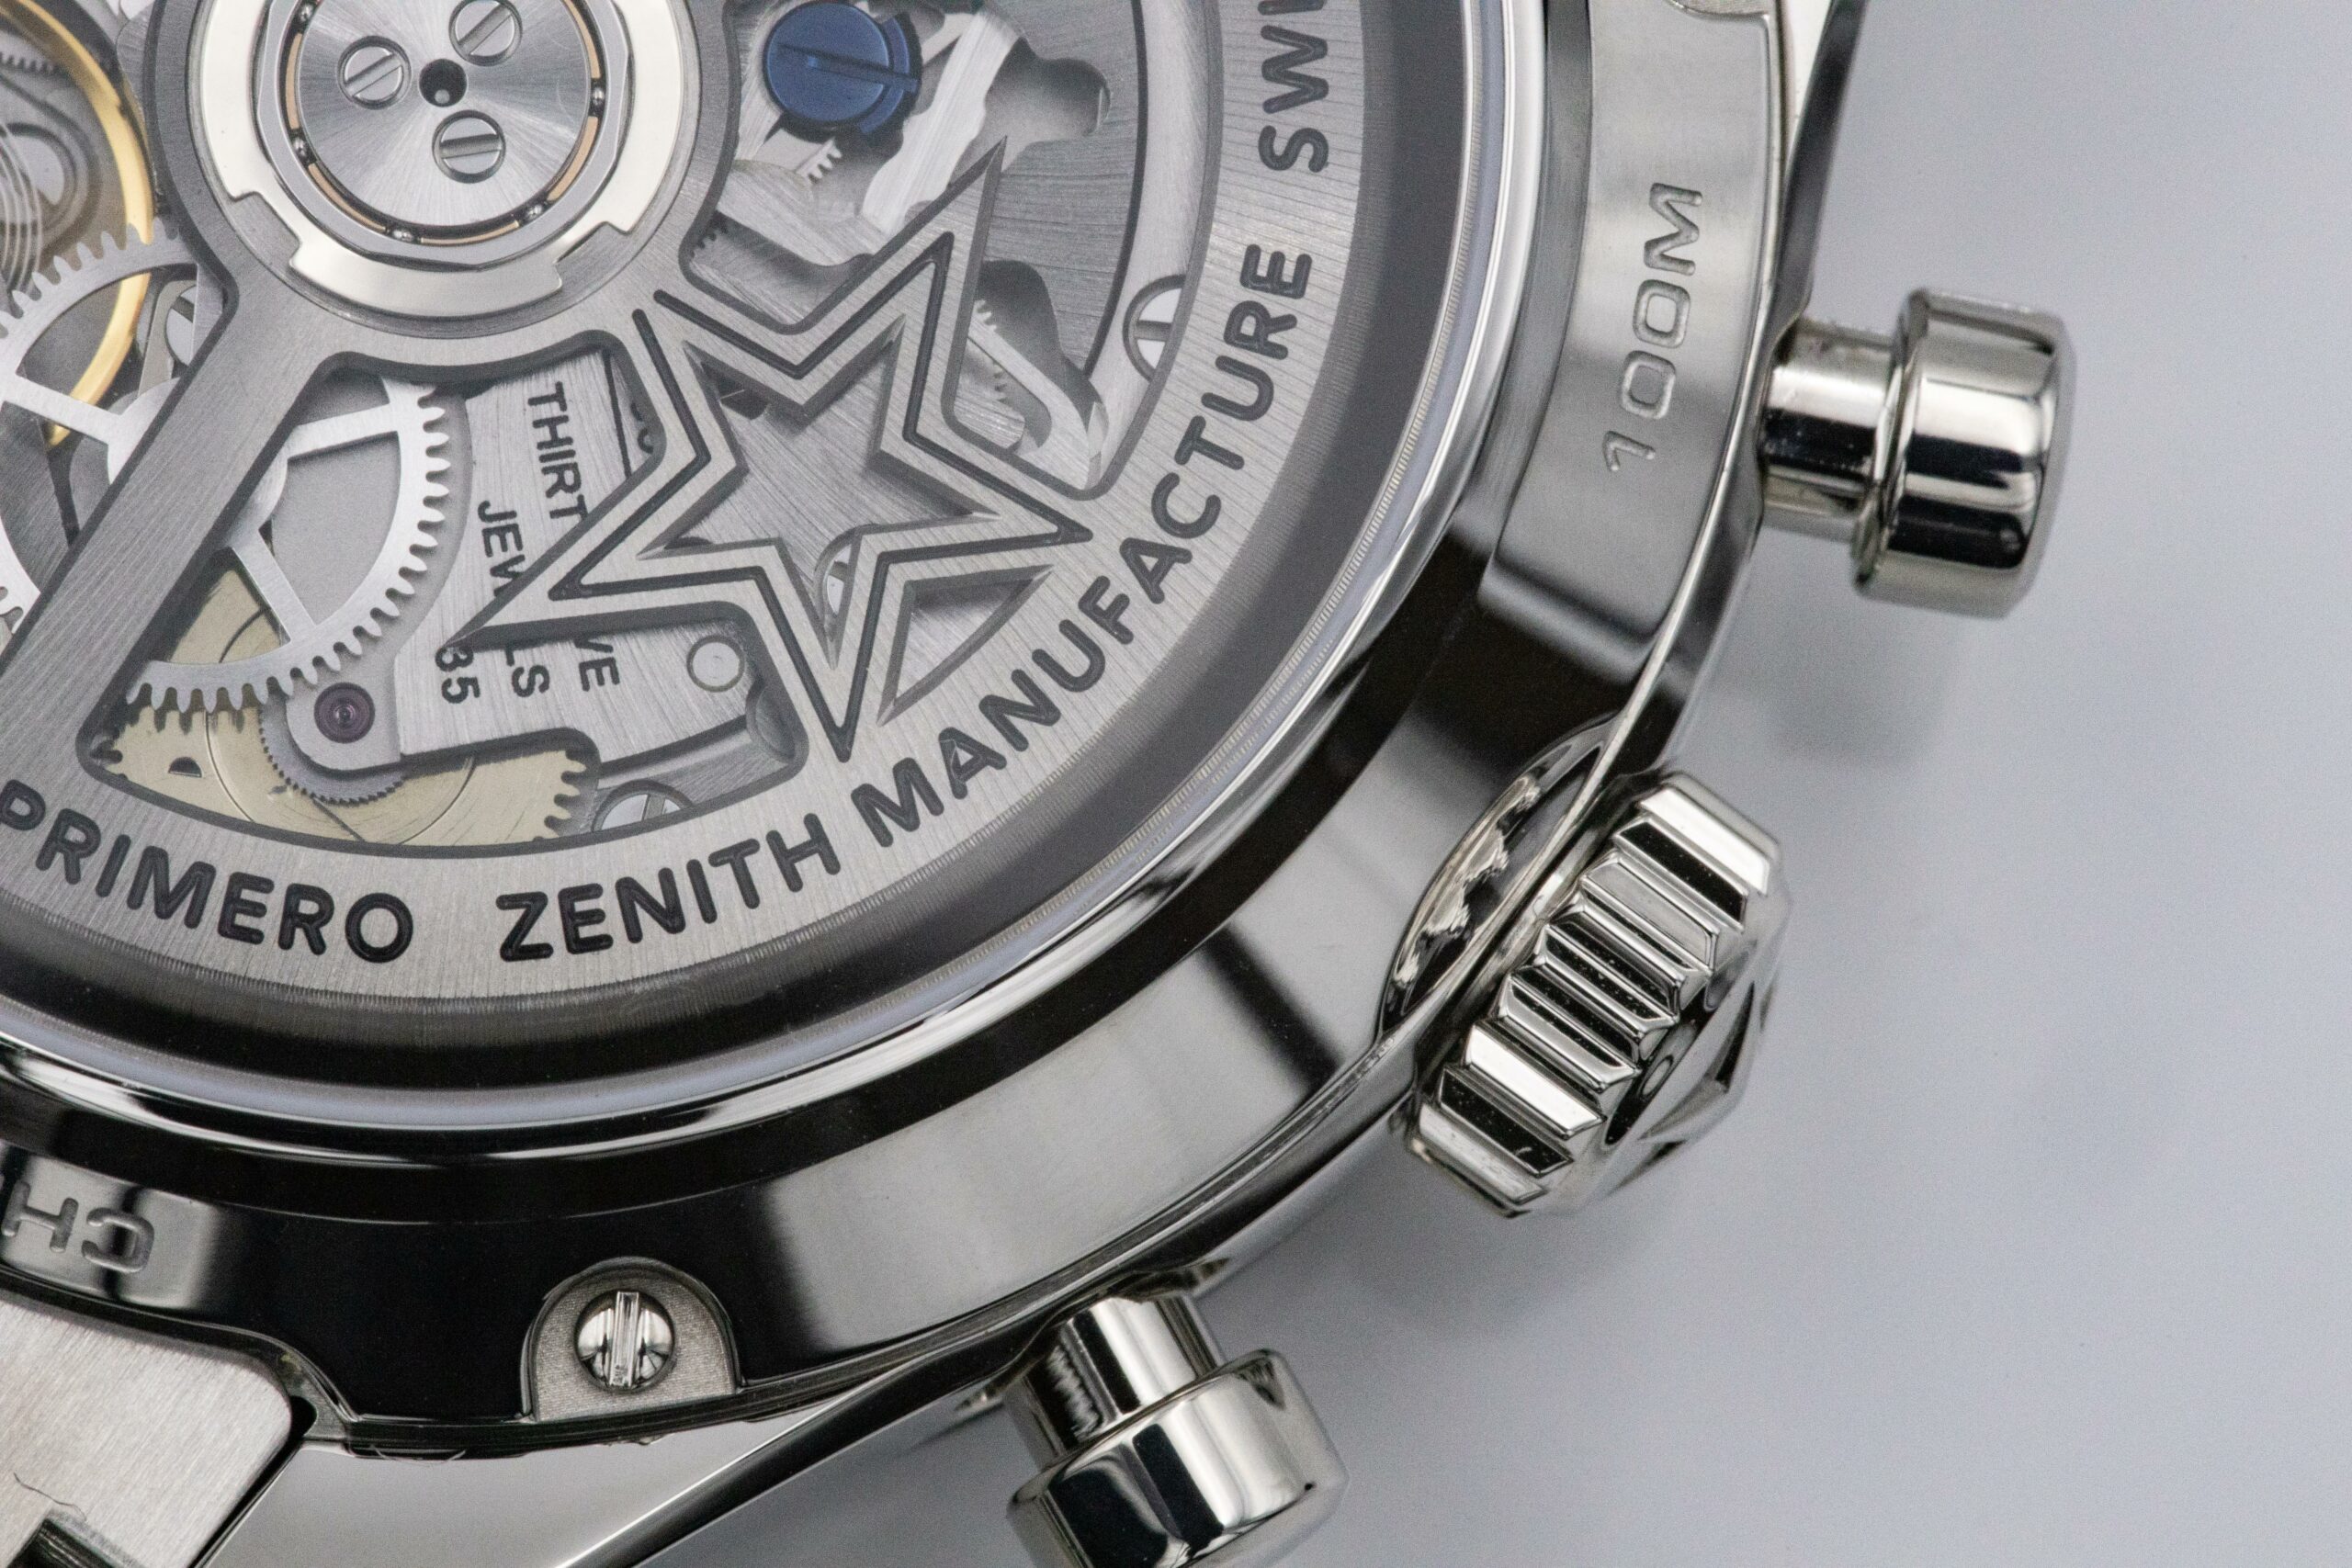 Zenith Introduces the Final Remake of the Original, 1969 El